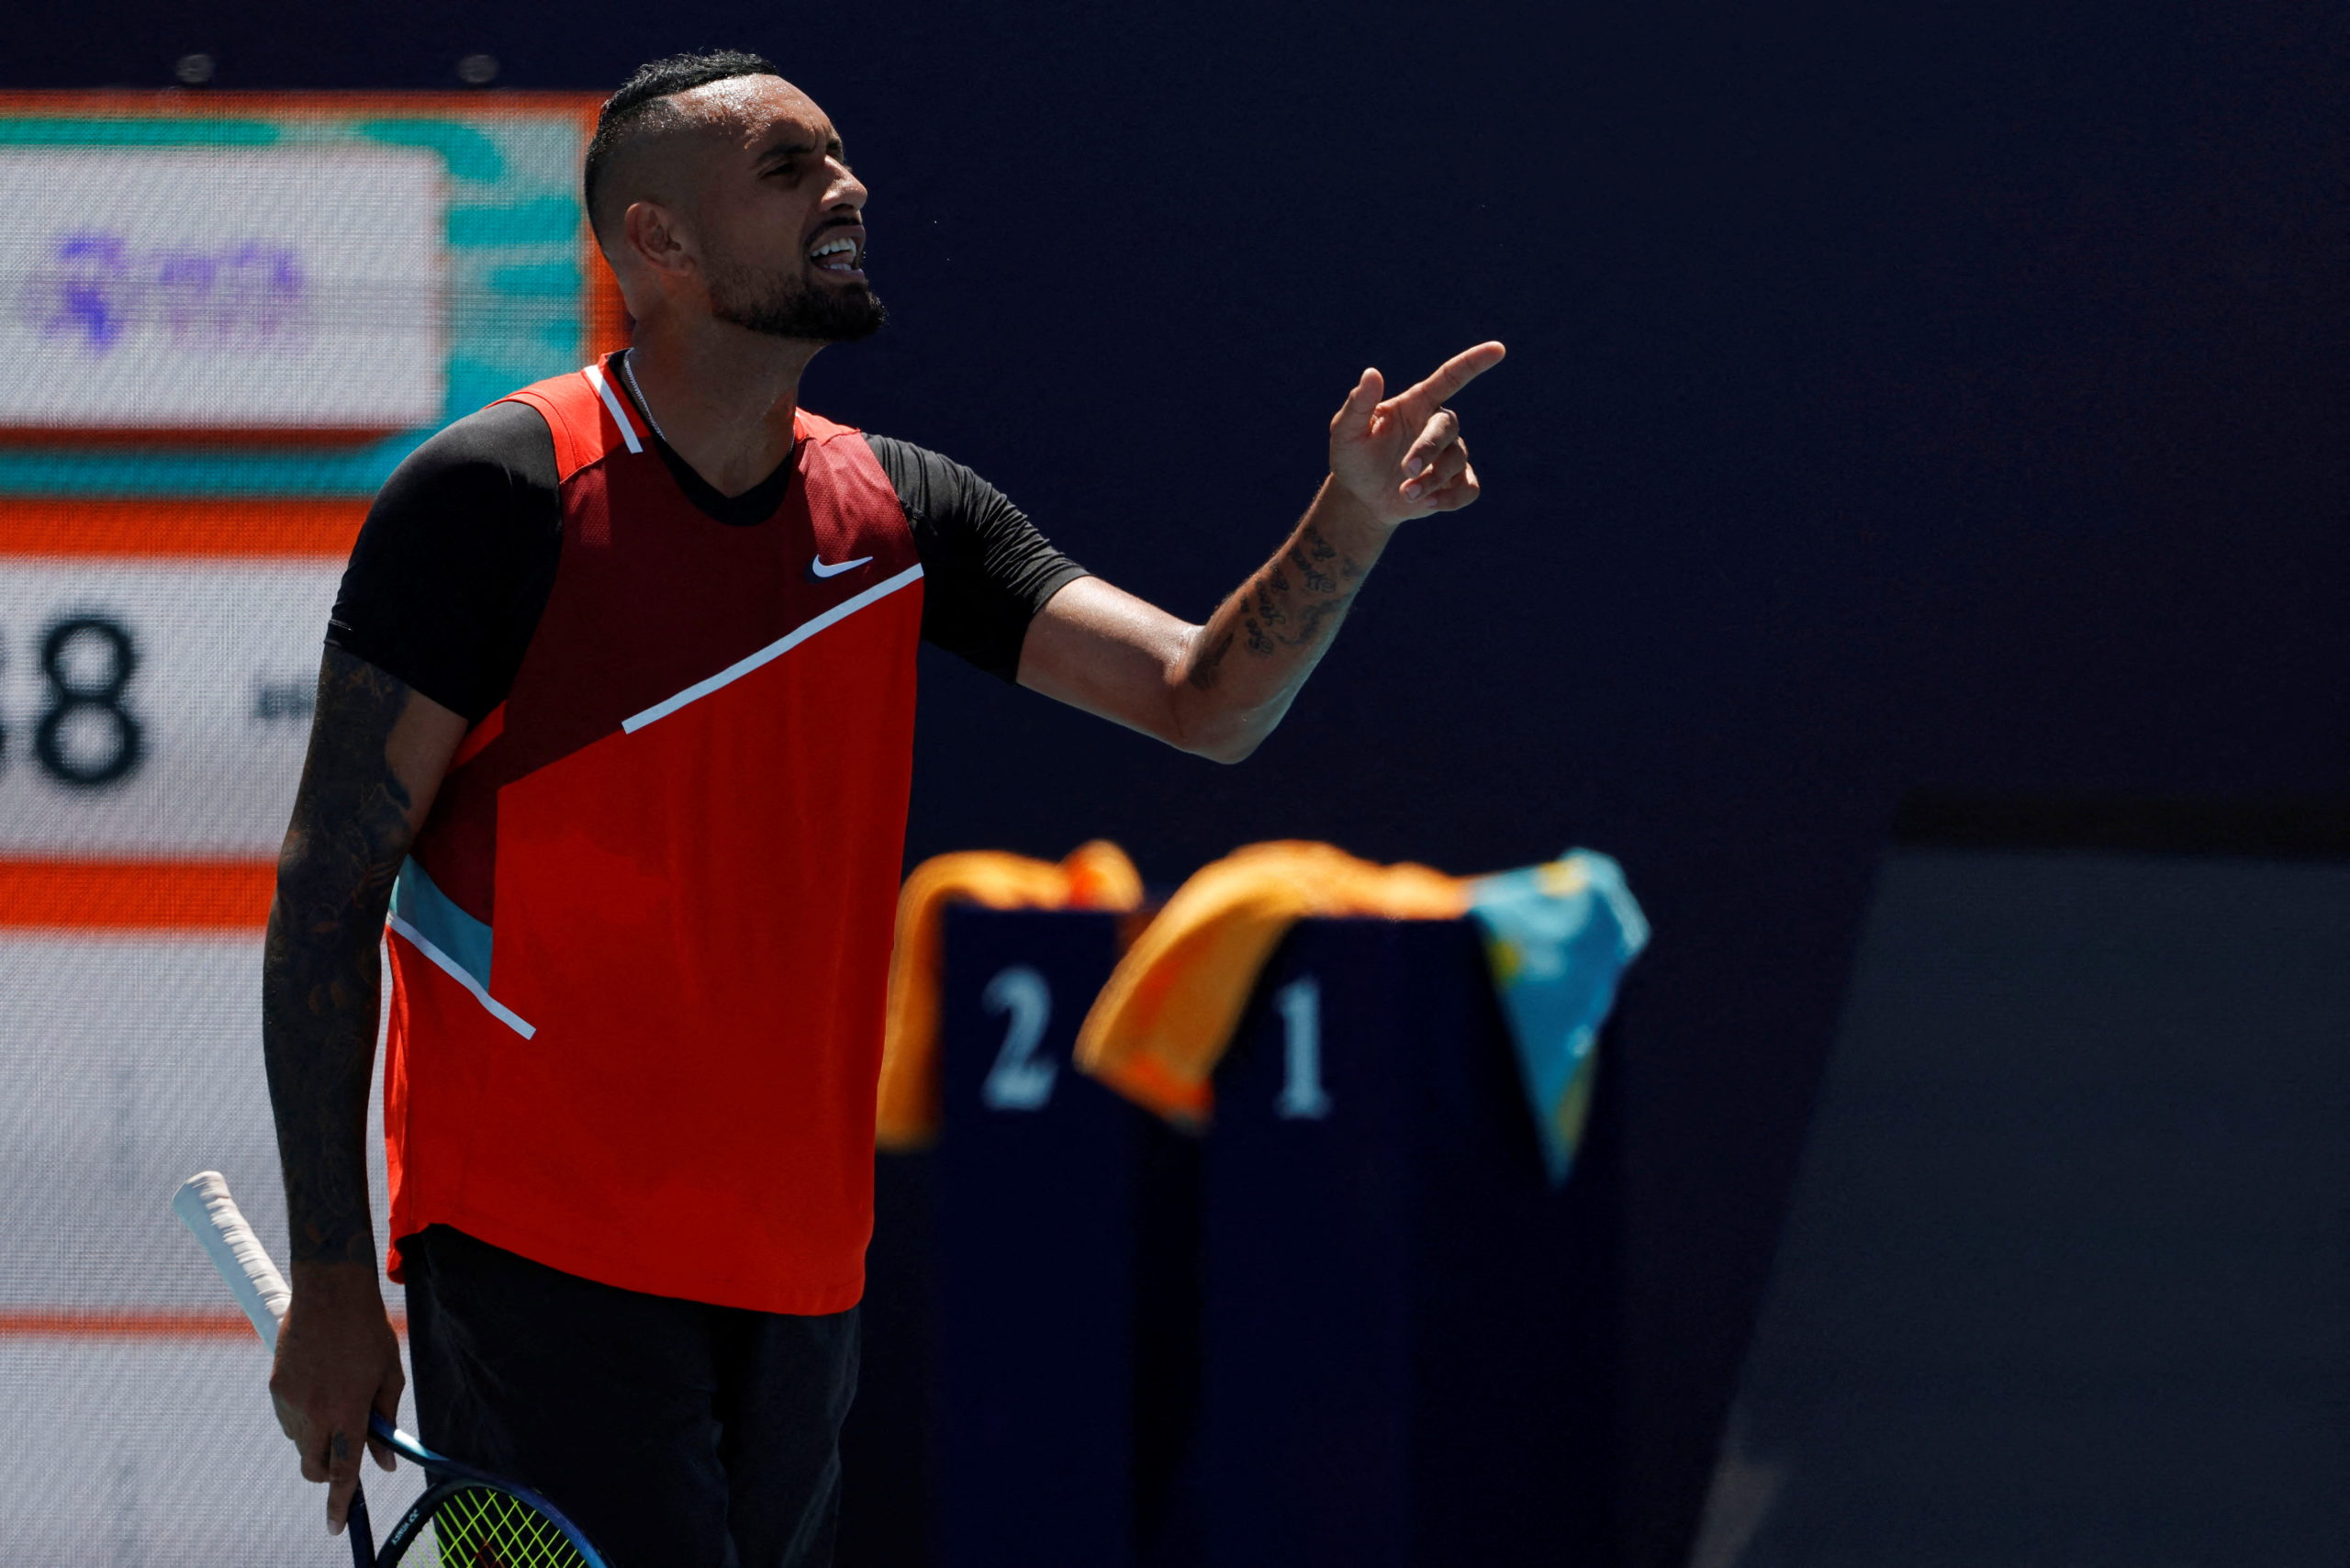  Nick Kyrgios (AUS) argues with chair umpire Carlos Bernardes (not pictured) after being assessed a point penalty during the first set tiebreaker against Jannik Sinner (ITA)(not pictured) in a fourth round men's singles match in the Miami Open at Hard Rock Stadium. 